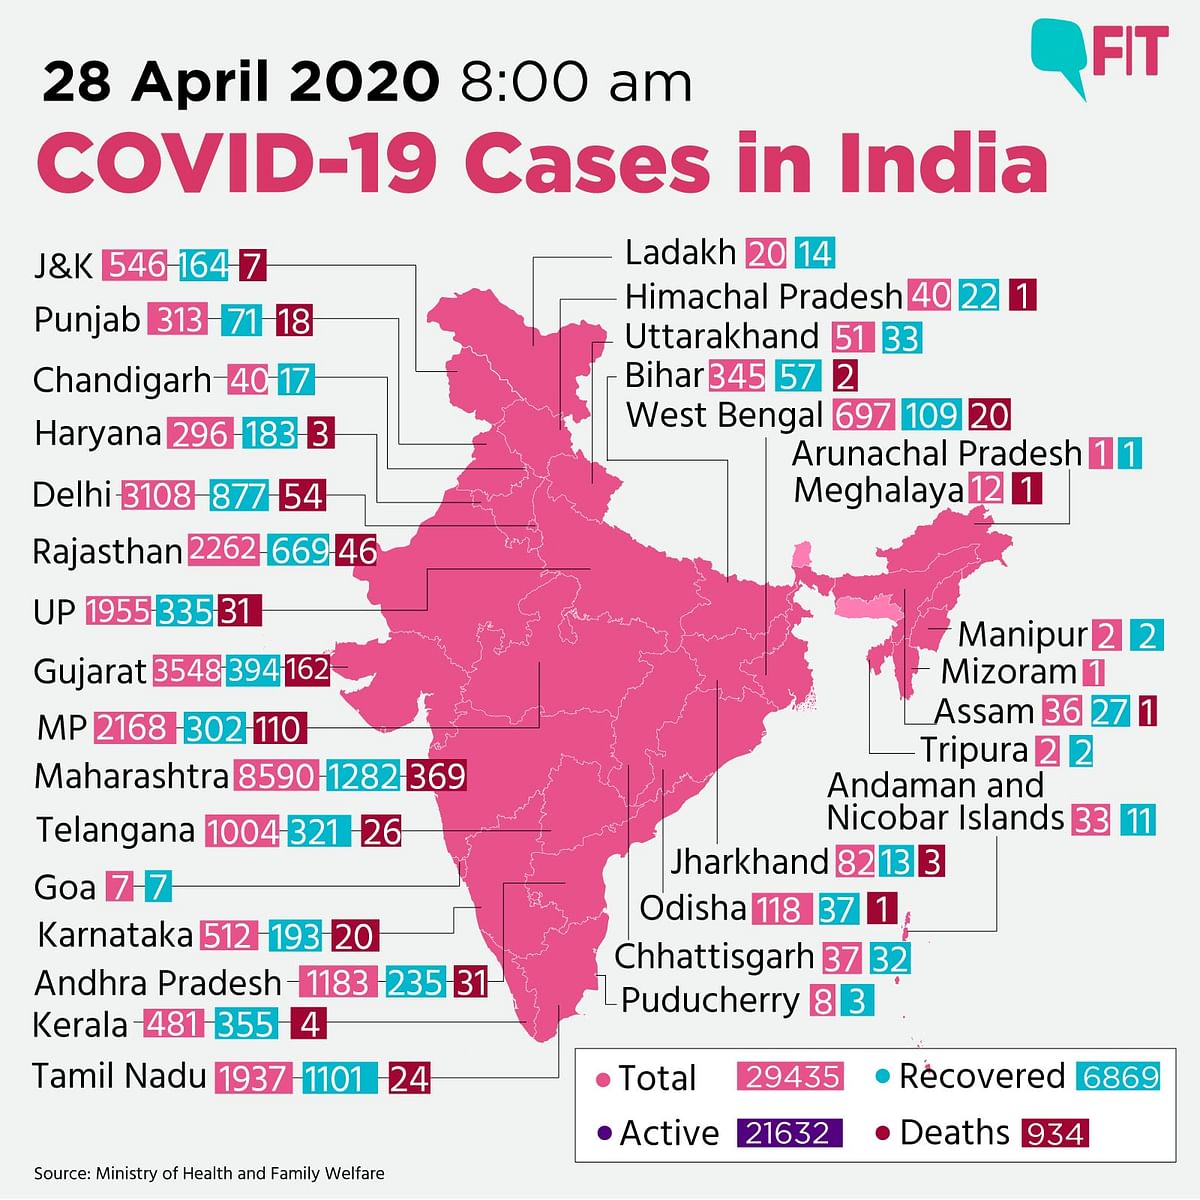 COVID-19 India Updates: Death Toll Rises to 934, Cases at 29435